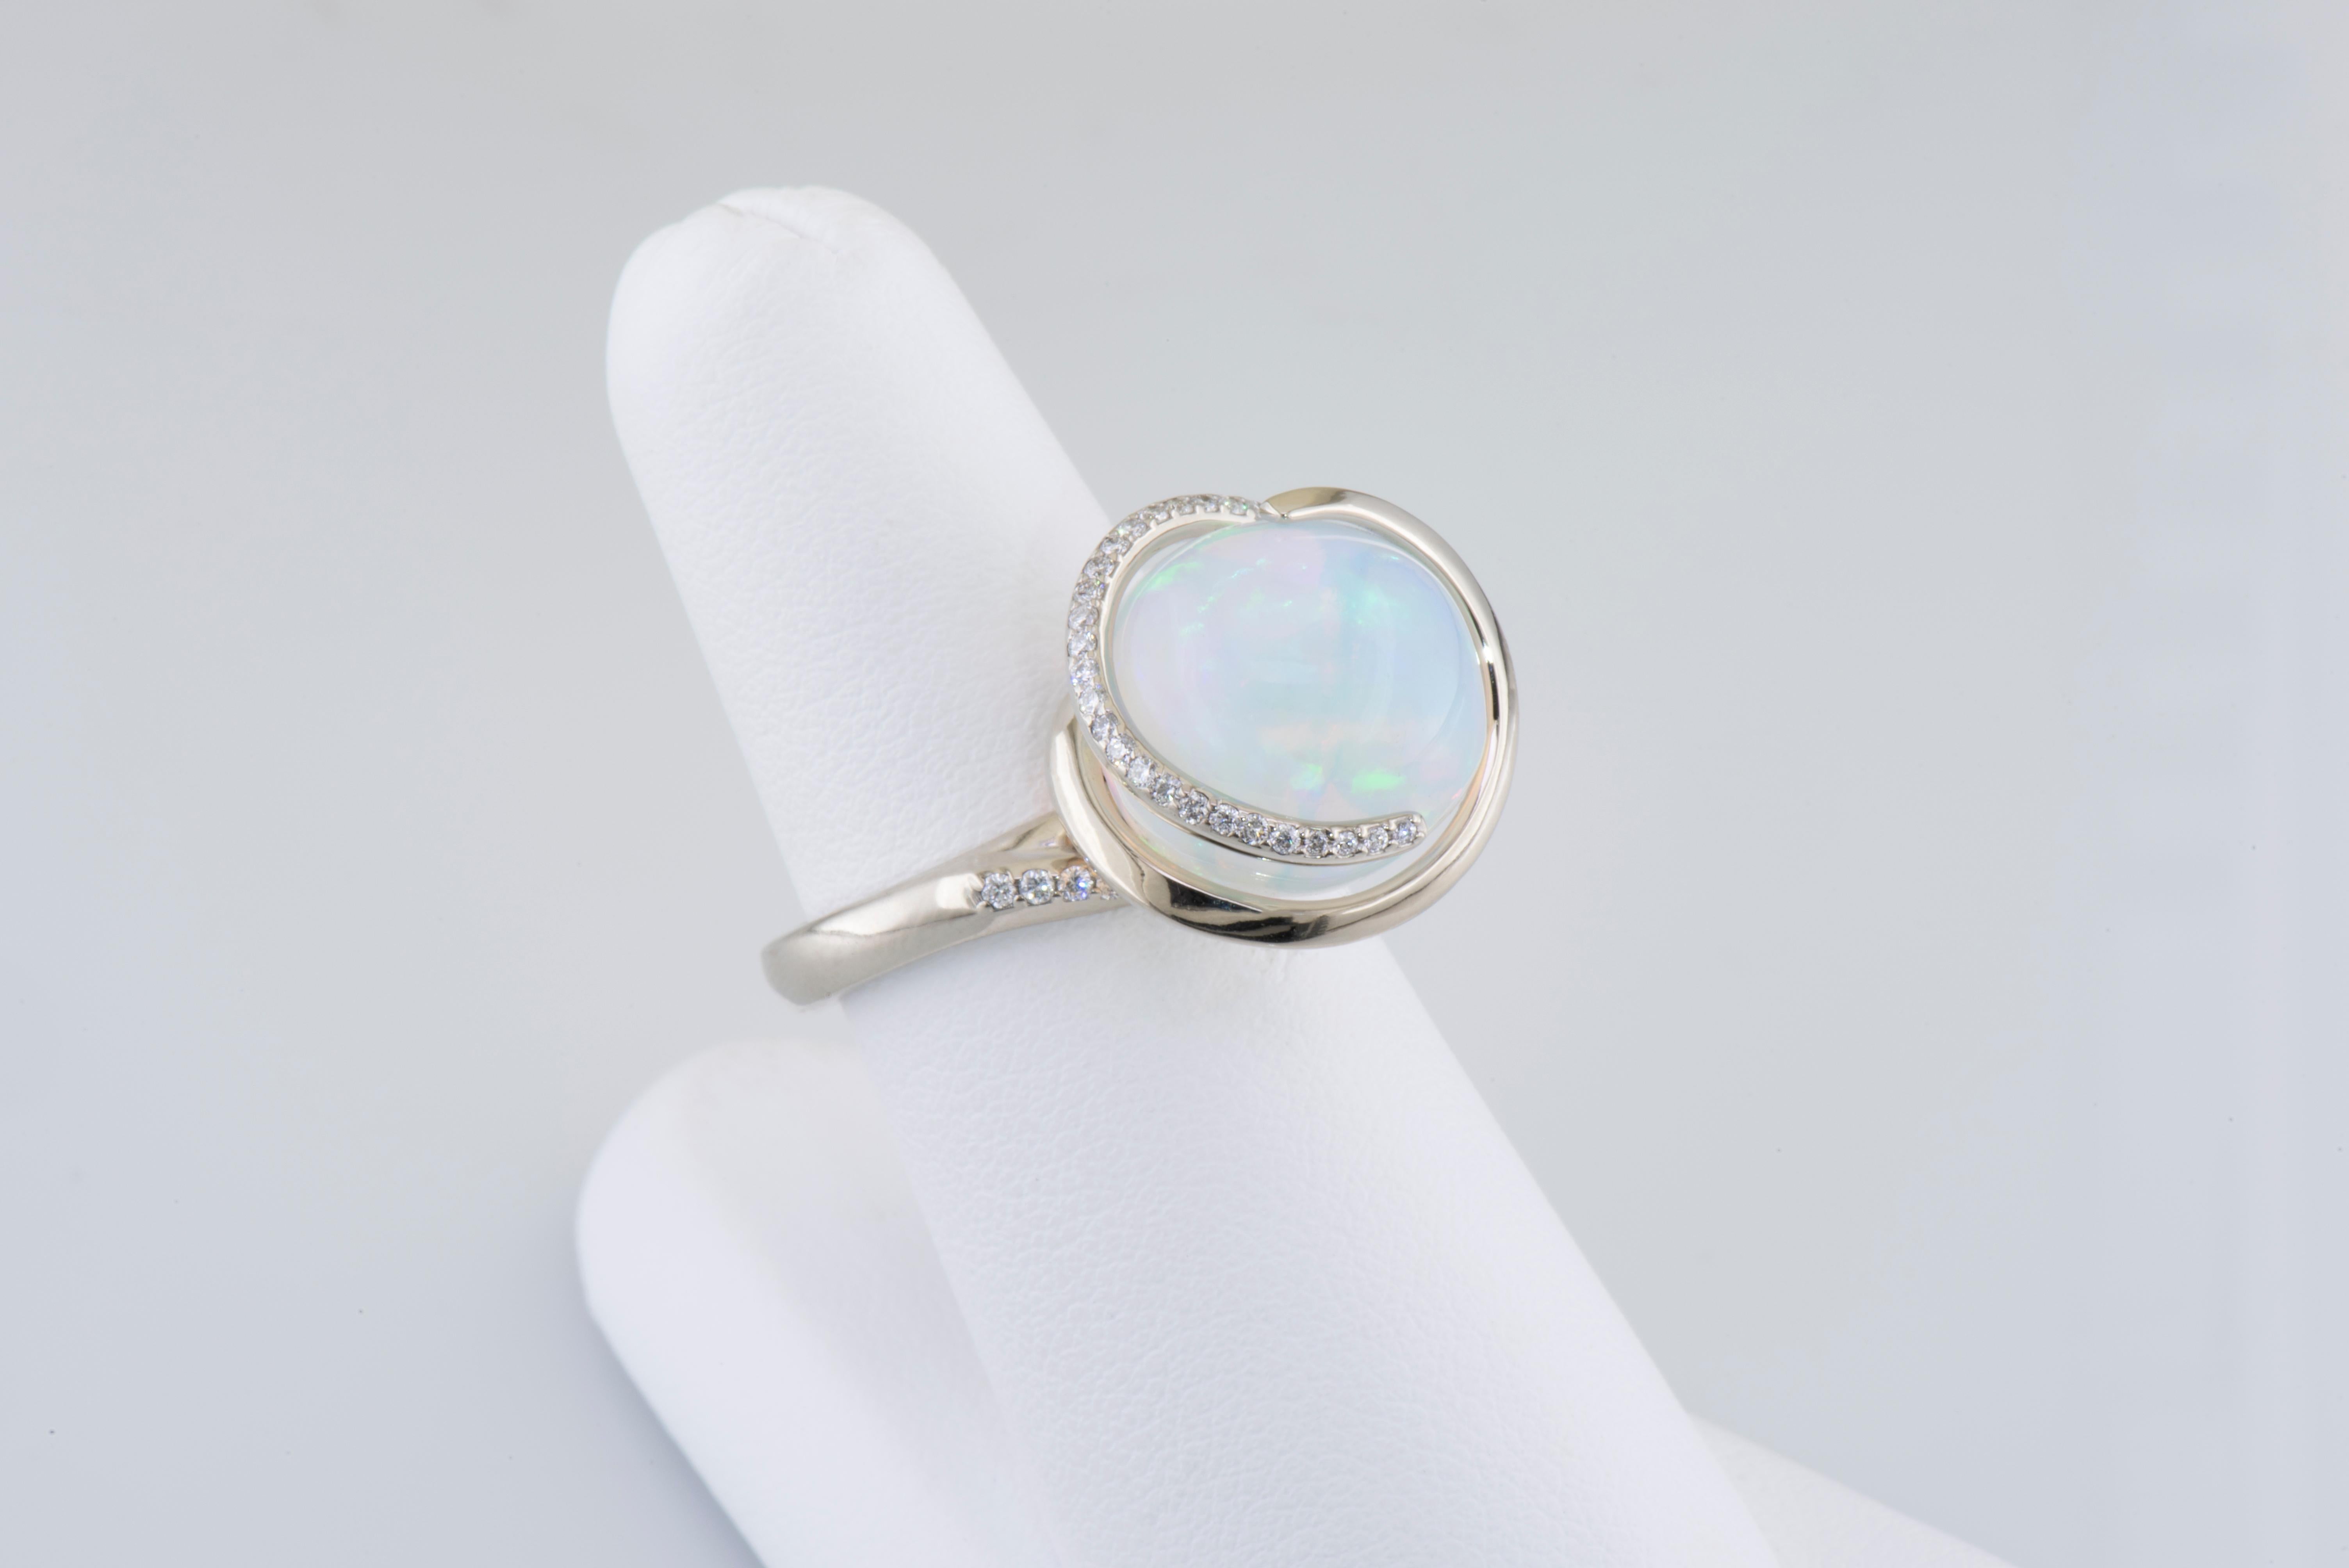 Women's or Men's Dianna Rae Jewelry White Gold Opal Orb Diamond Cocktail Ring